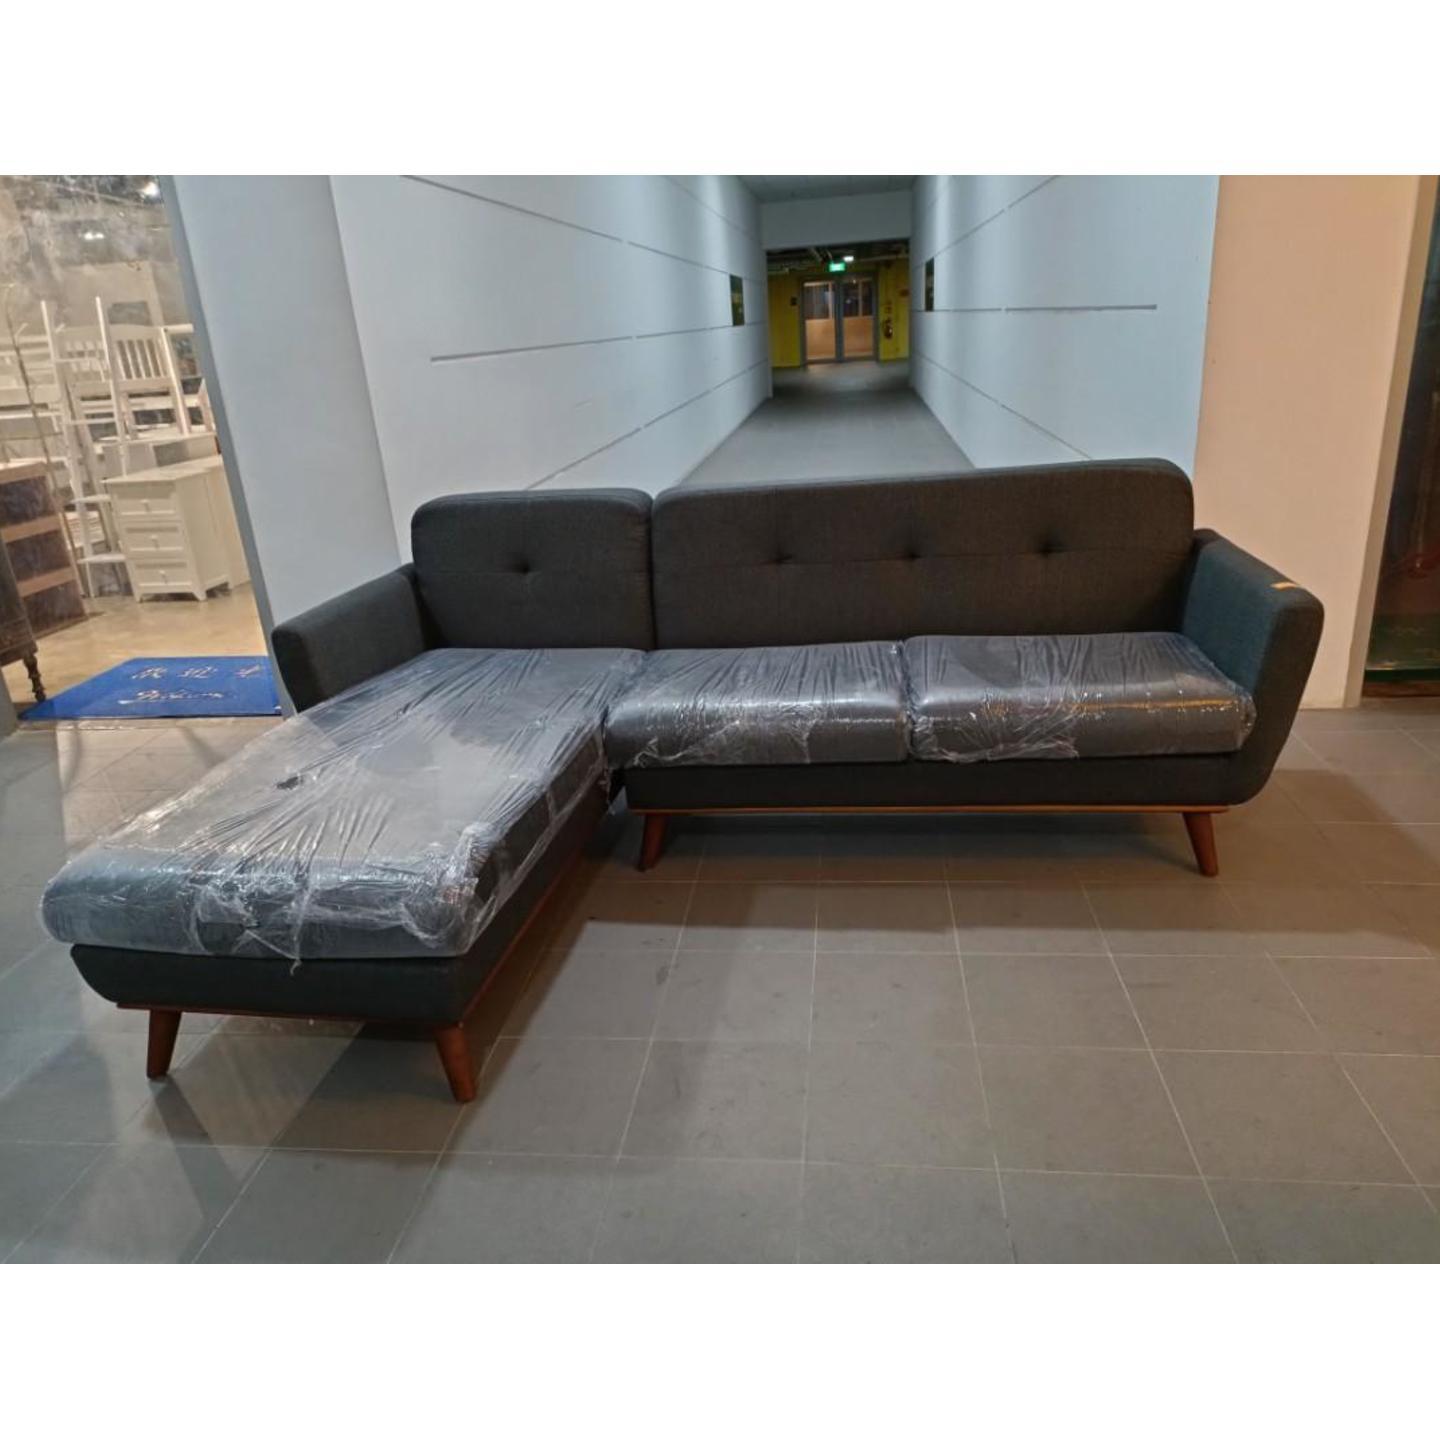 HARRIS L-Shaped Sofa in DARK GREY FABRIC (RIGHT WHEN SEATED)